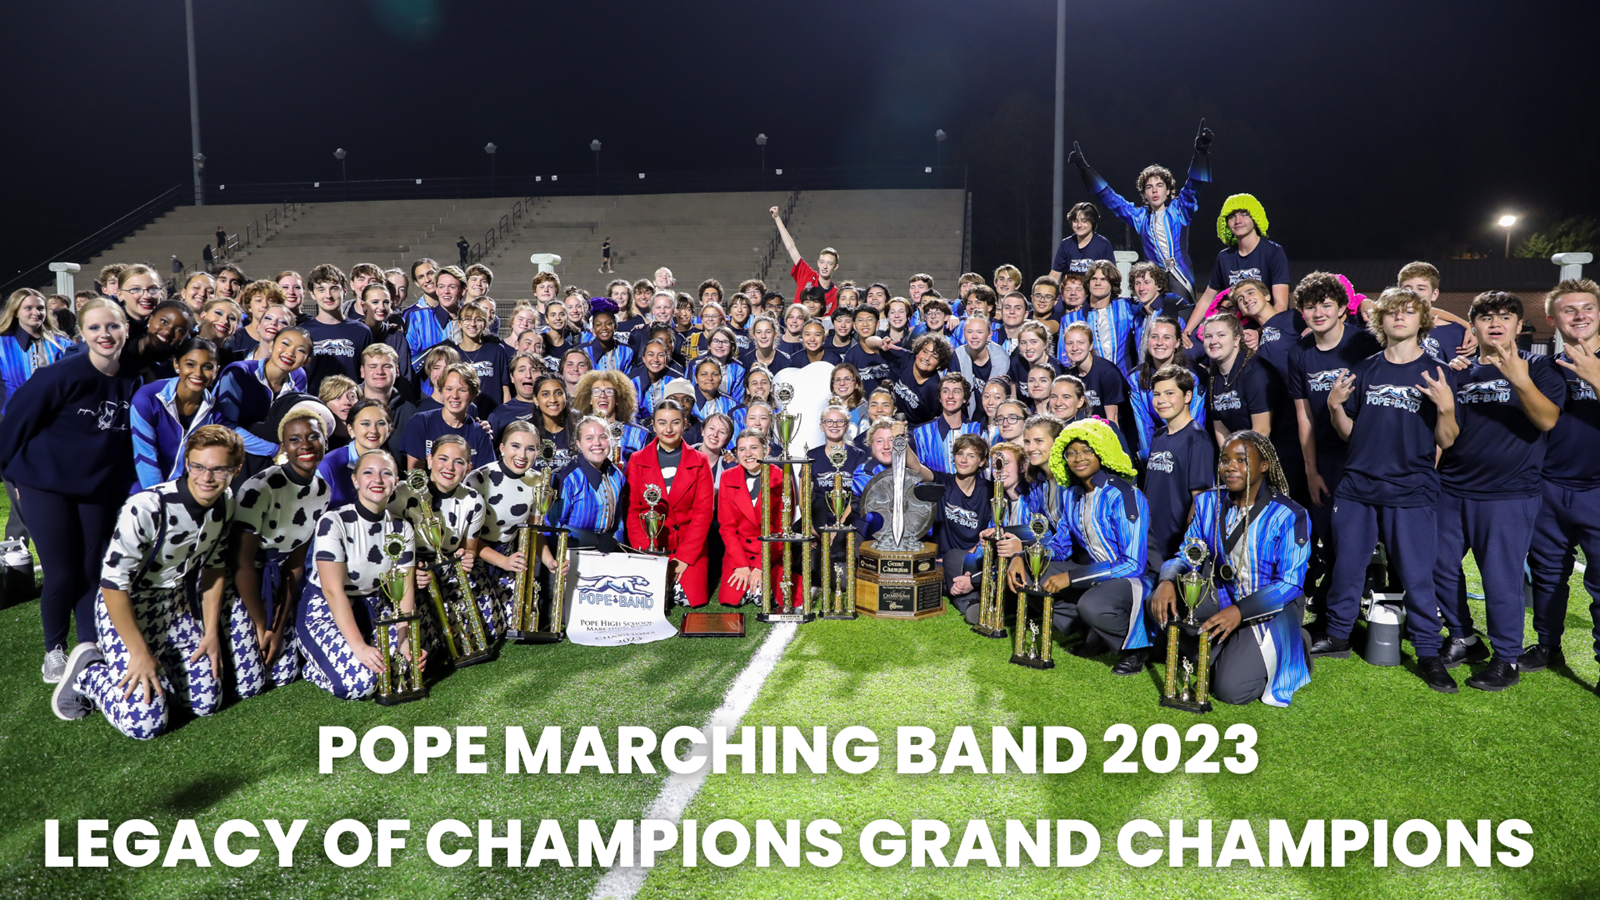 Pope 2023 marching band group photo with trophy